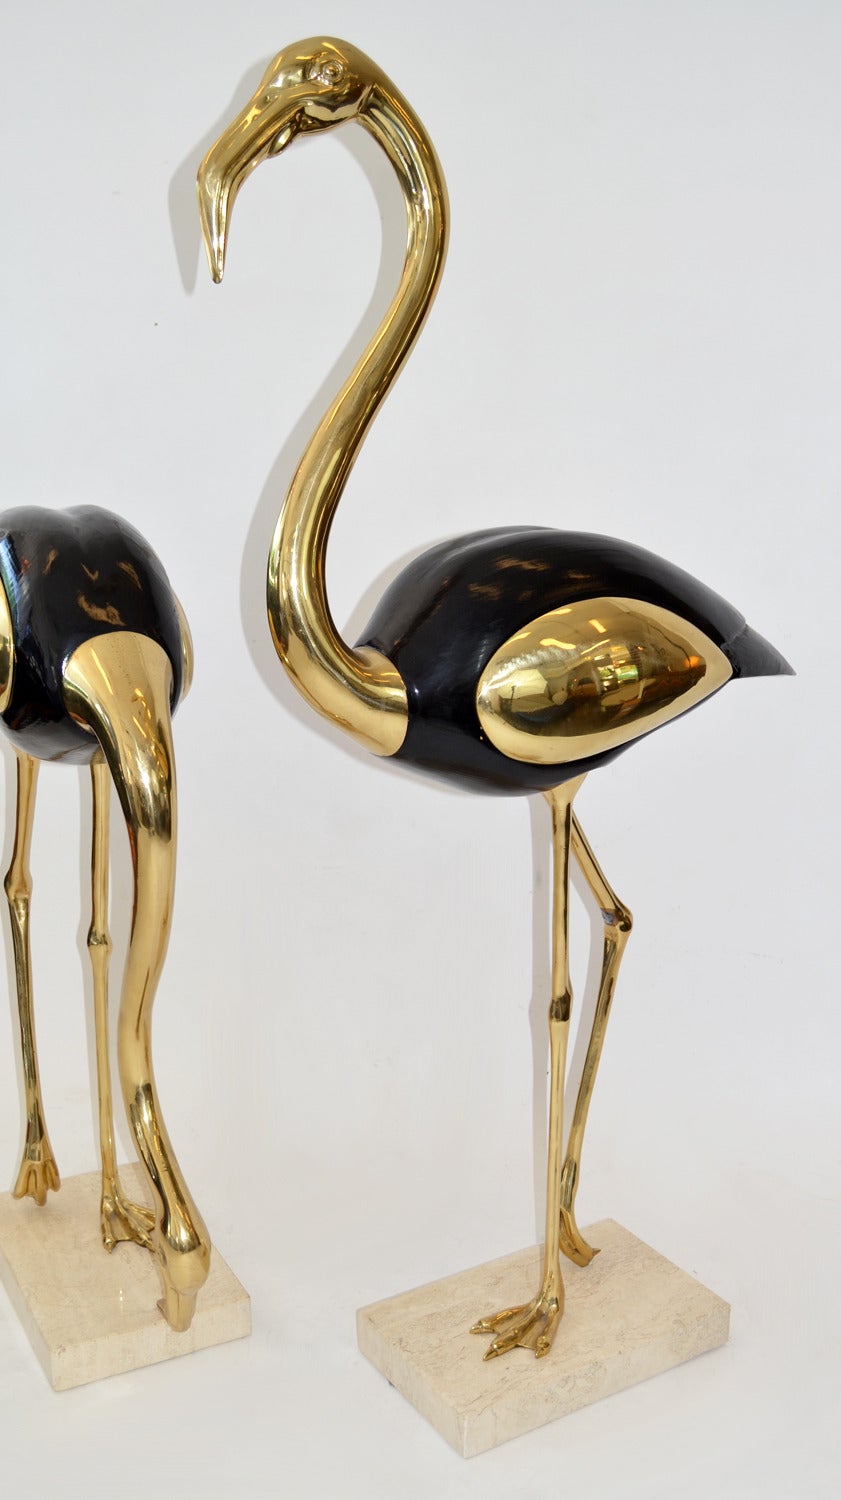 Pair of nearly five-foot tall stylized brass and ebonized wood Flamingos on travertine bases. Likely Italian.